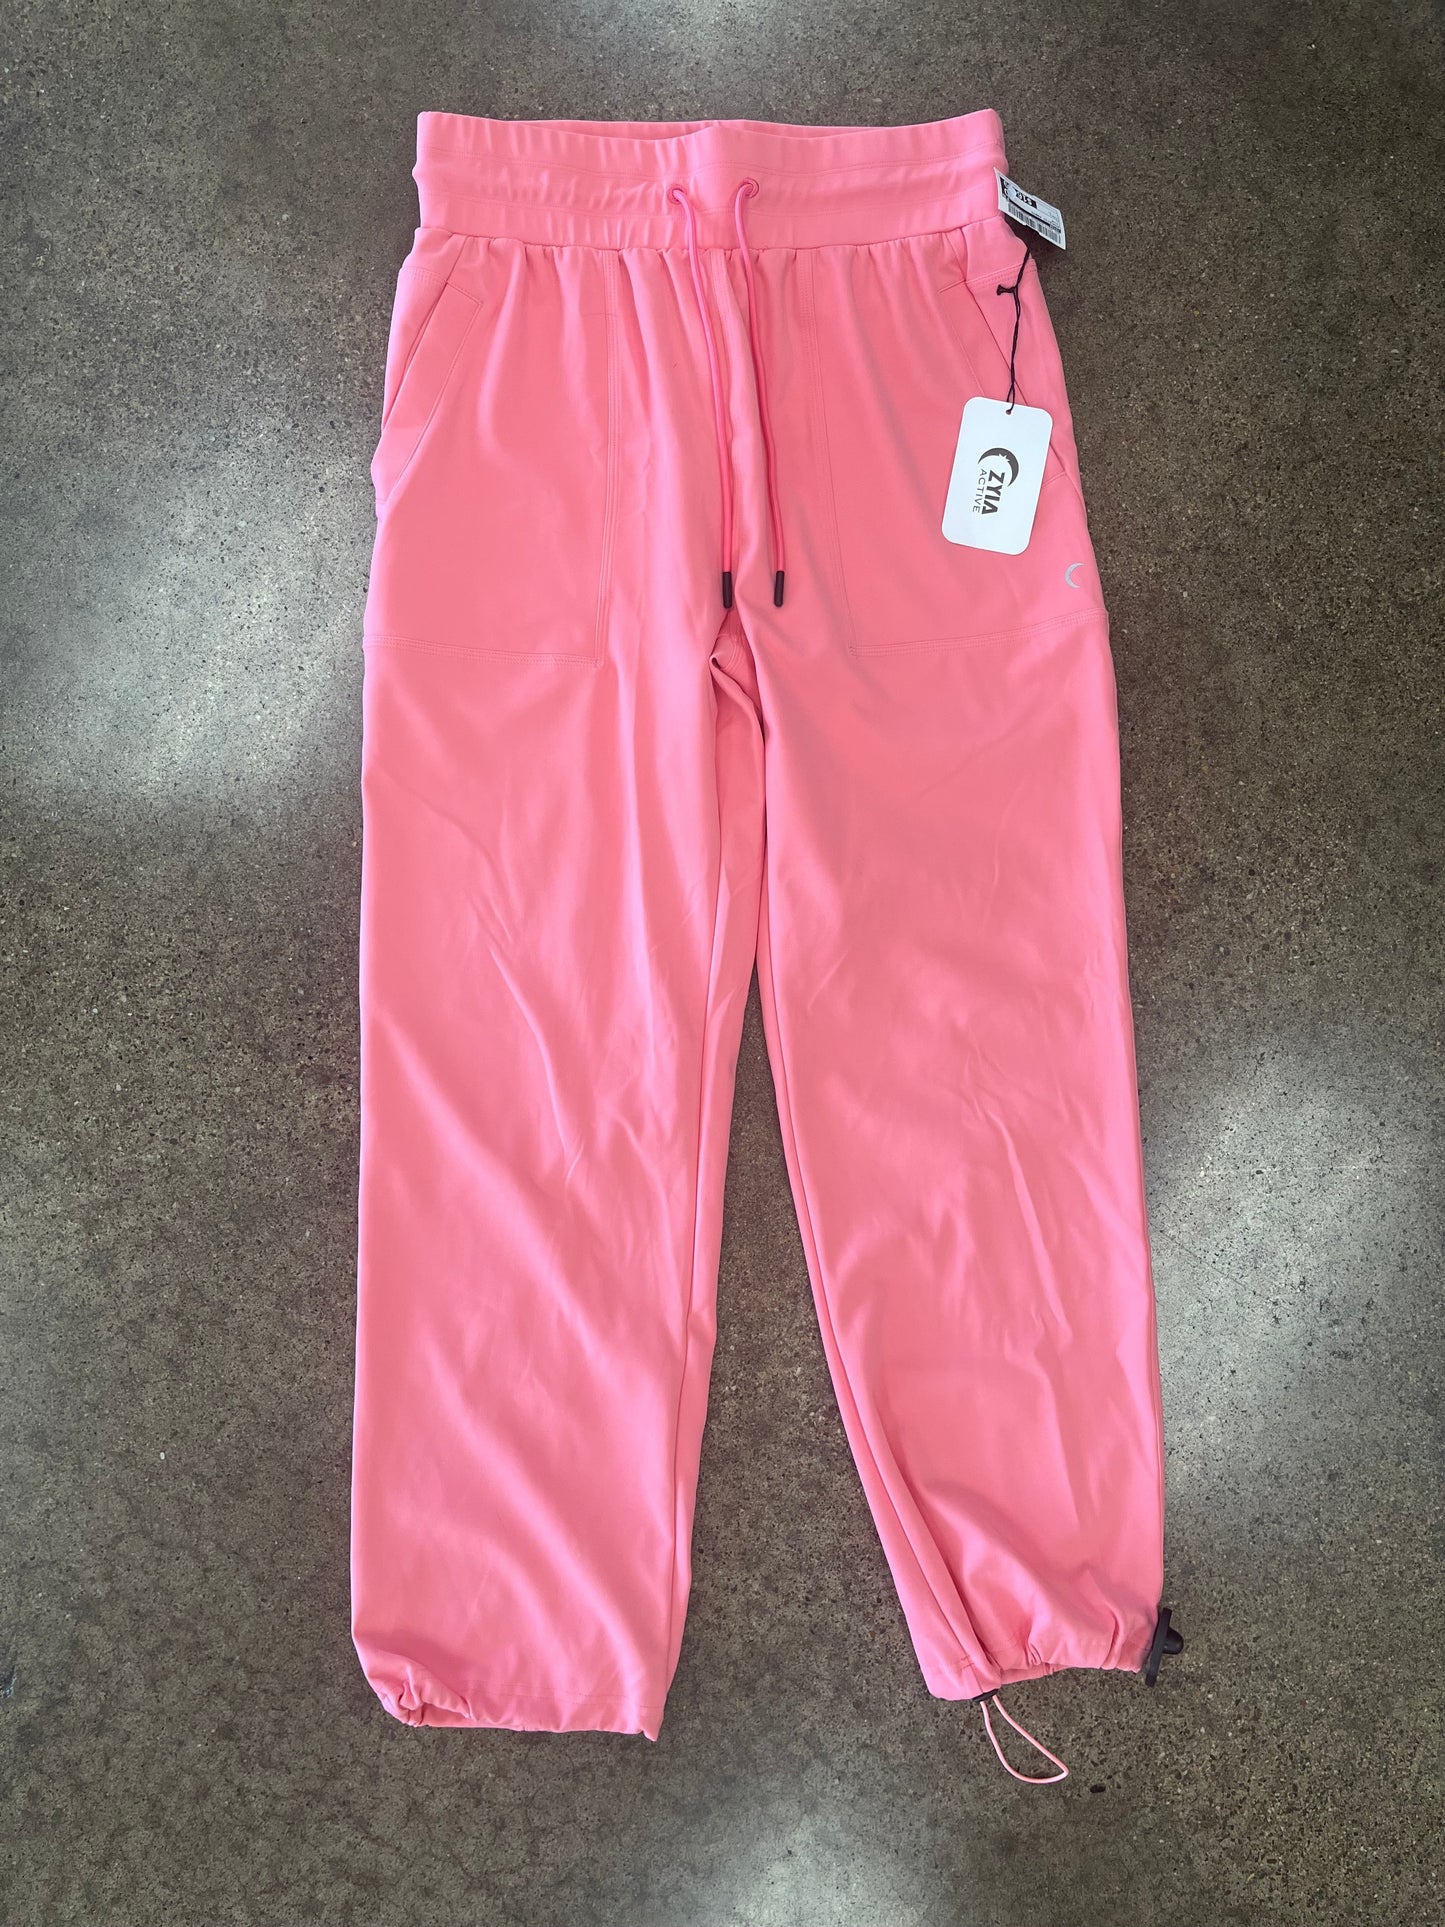 Pink Athletic Pants Zyia, Size L